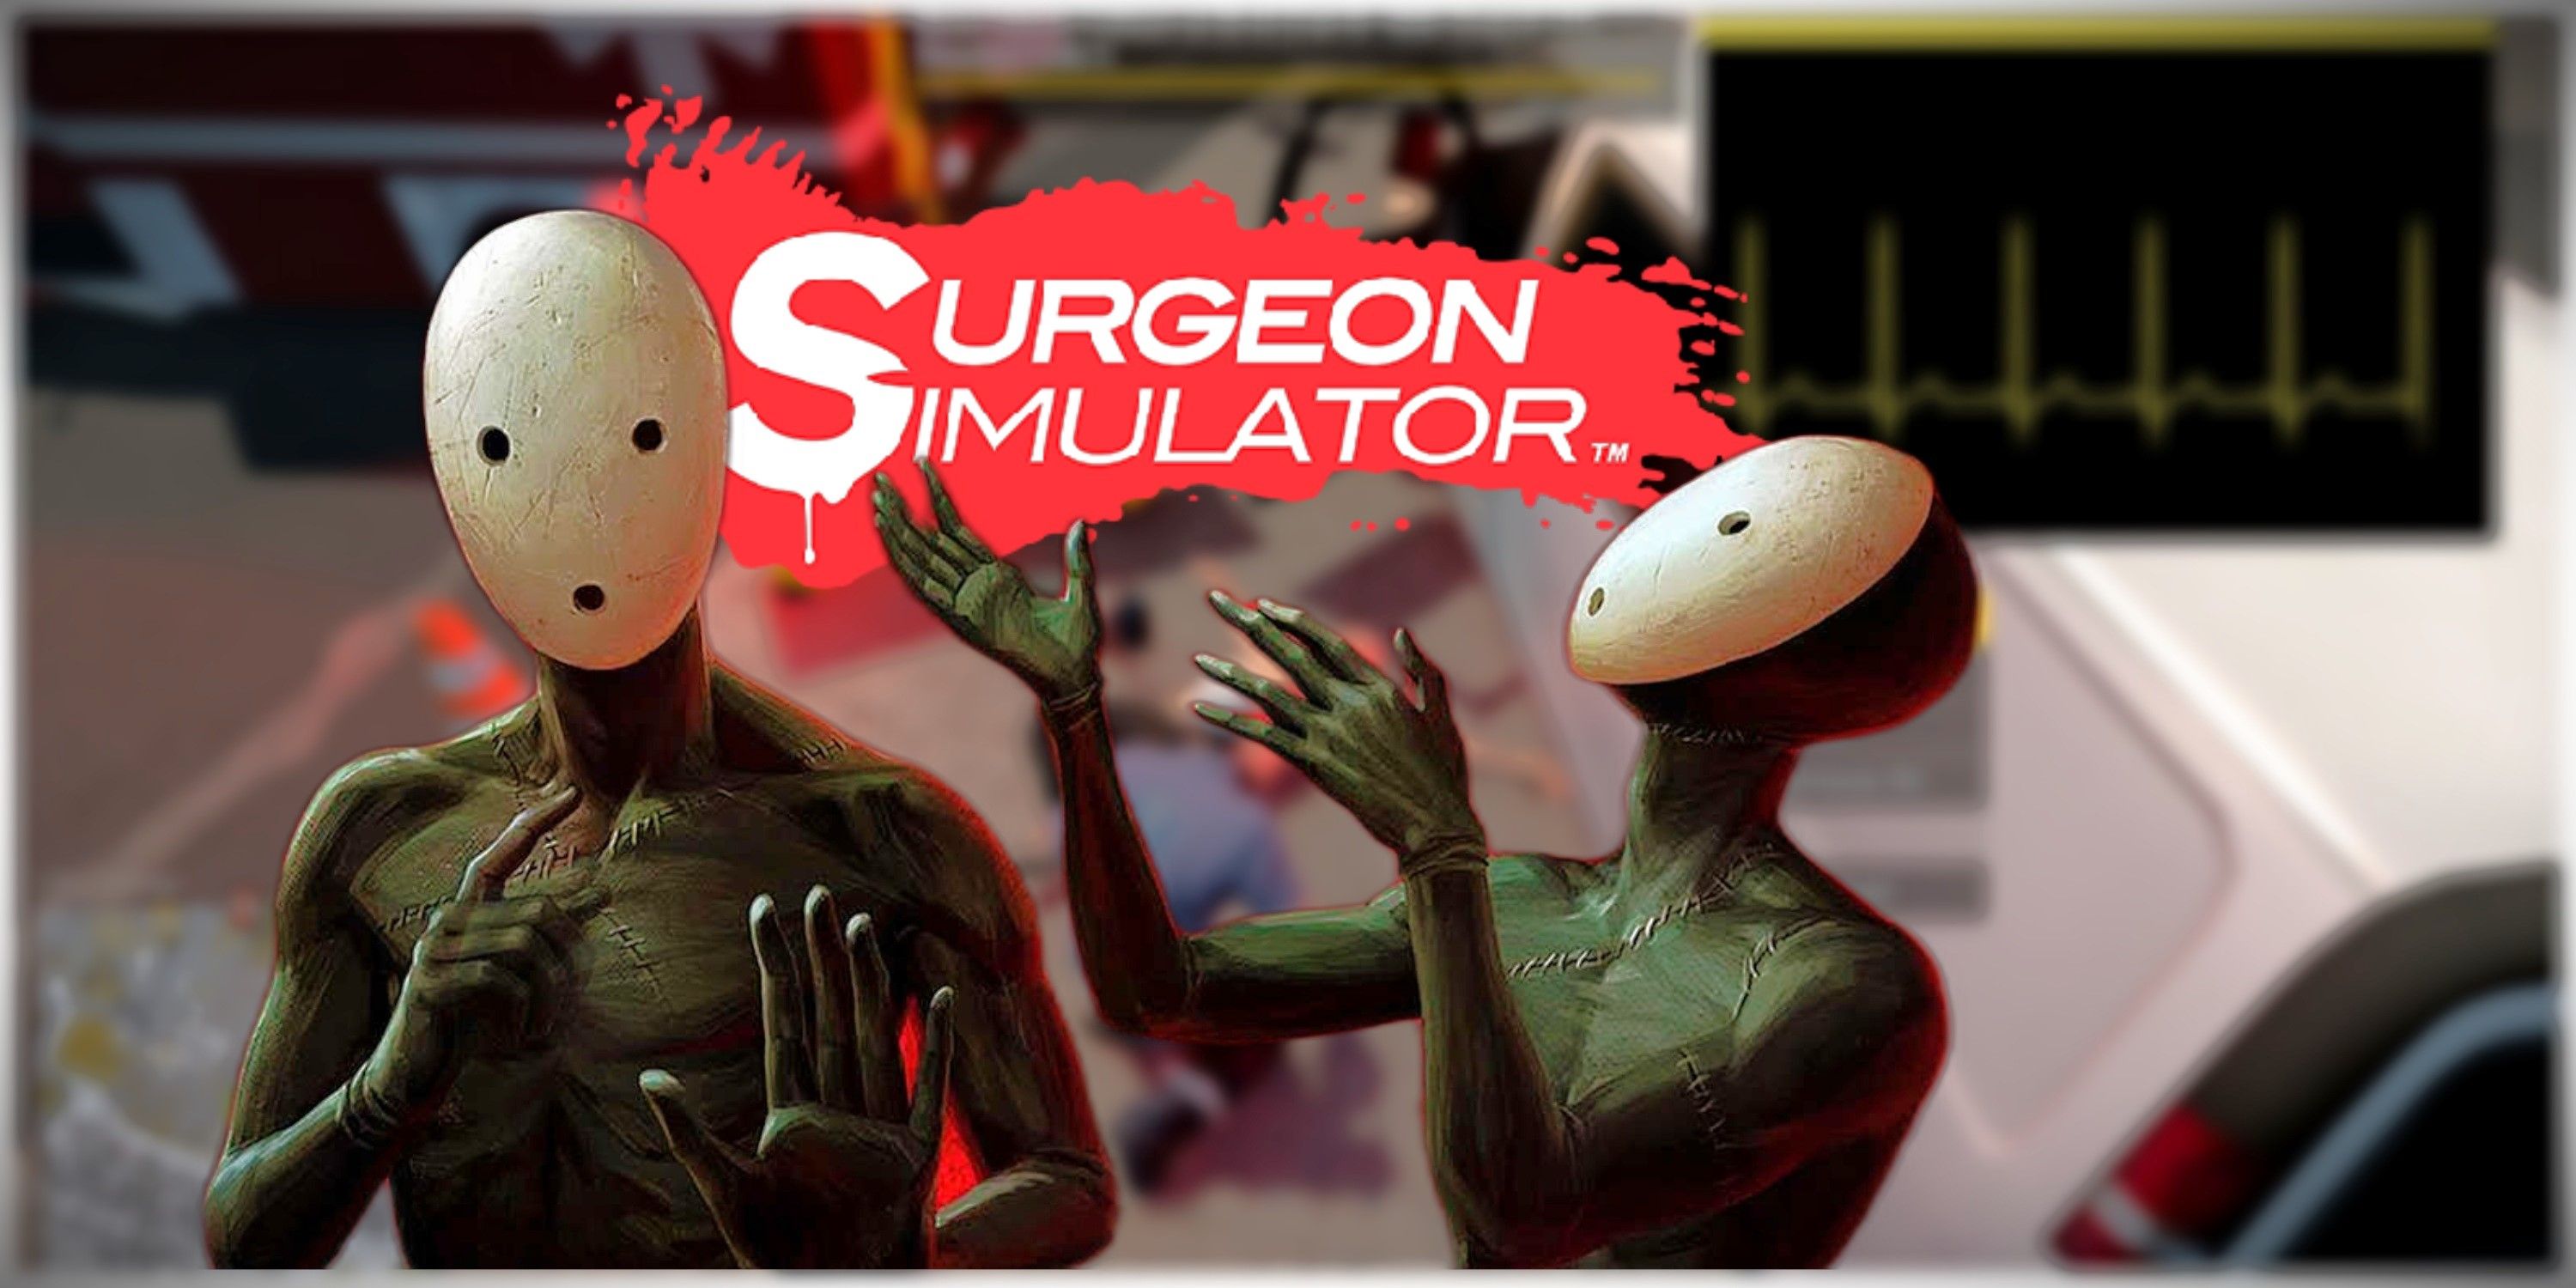 Best Games That Let You Be A Doctor (Featured Image) - Pathologic2 characters pointing to Surgery Simulator logo + blurred Flashing Lights gameplay background